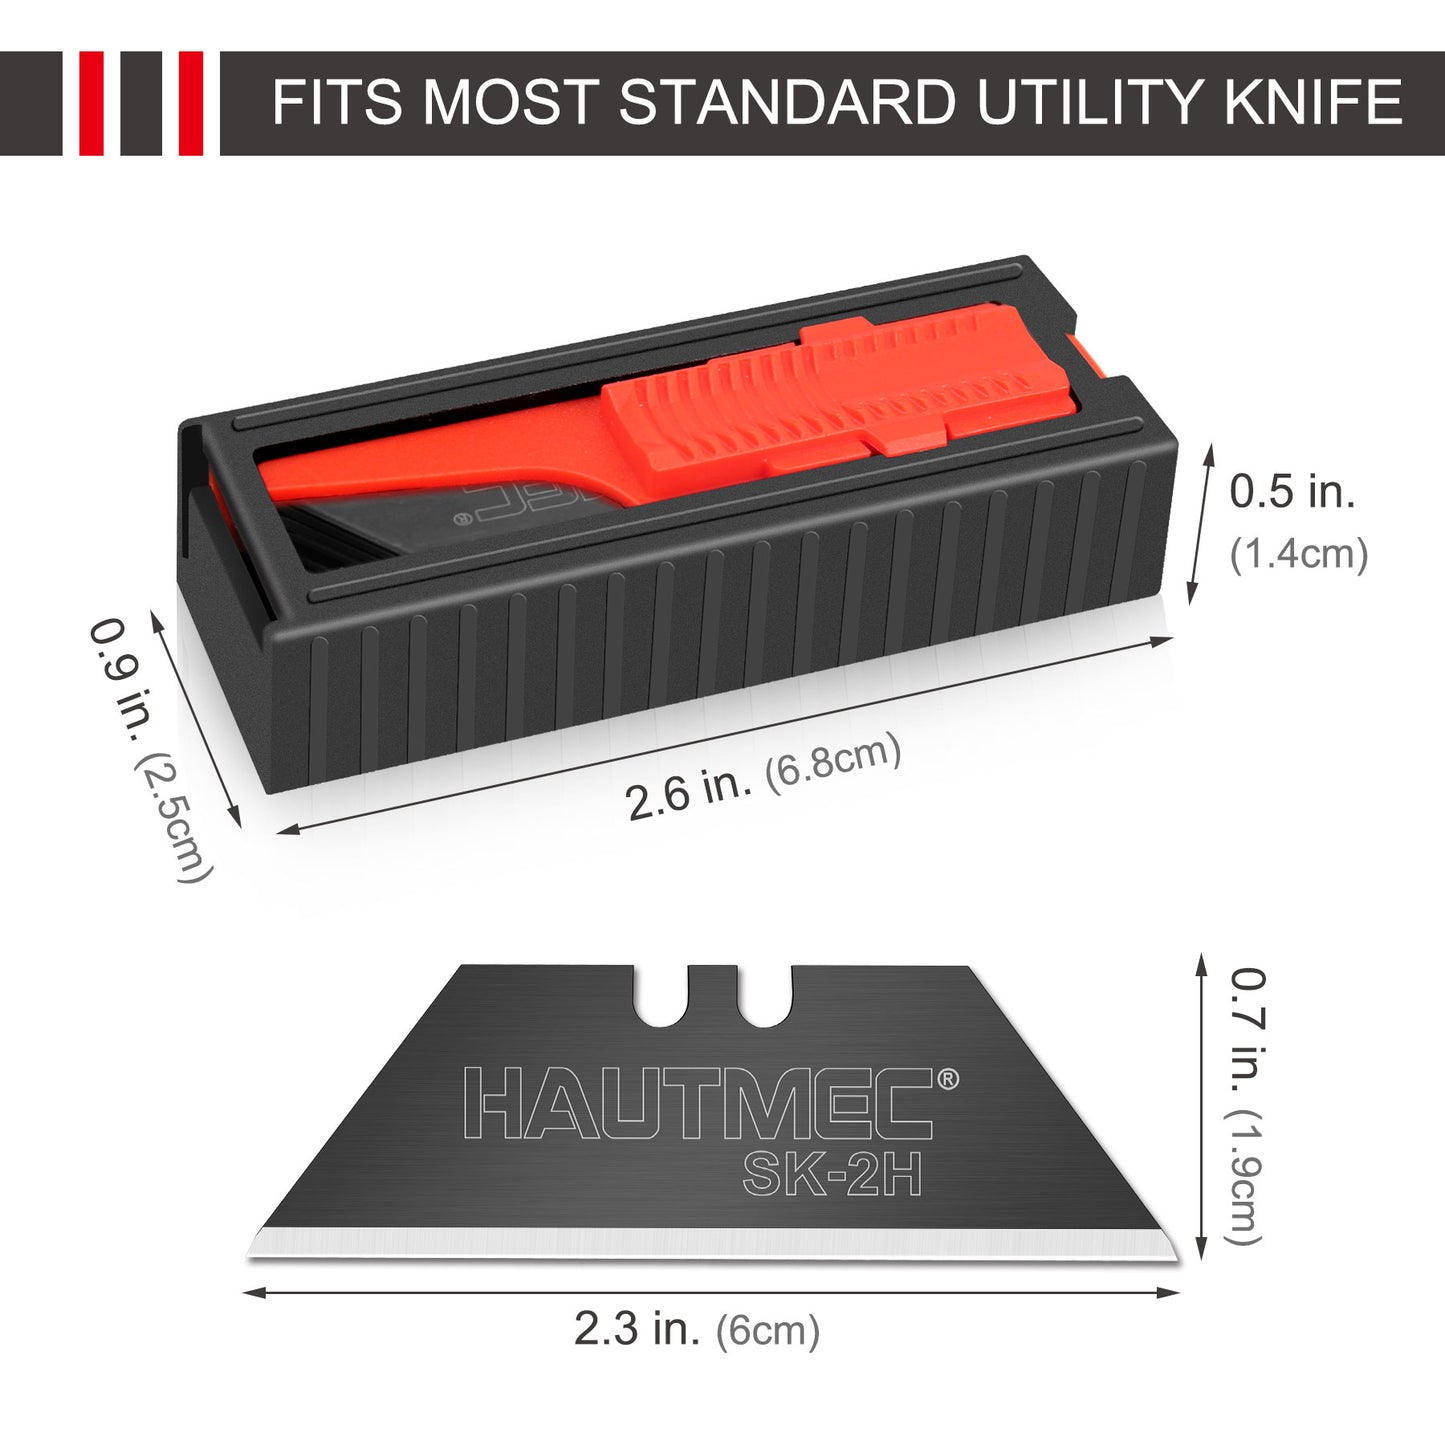 HAUTMEC Utility Knife Blades, 10-Pack with Dispenser, Standard Replacement Blades for Heavy Duty Utility Knives and Box Cutters, Sharper SK2H Black Blades HT0265-KN